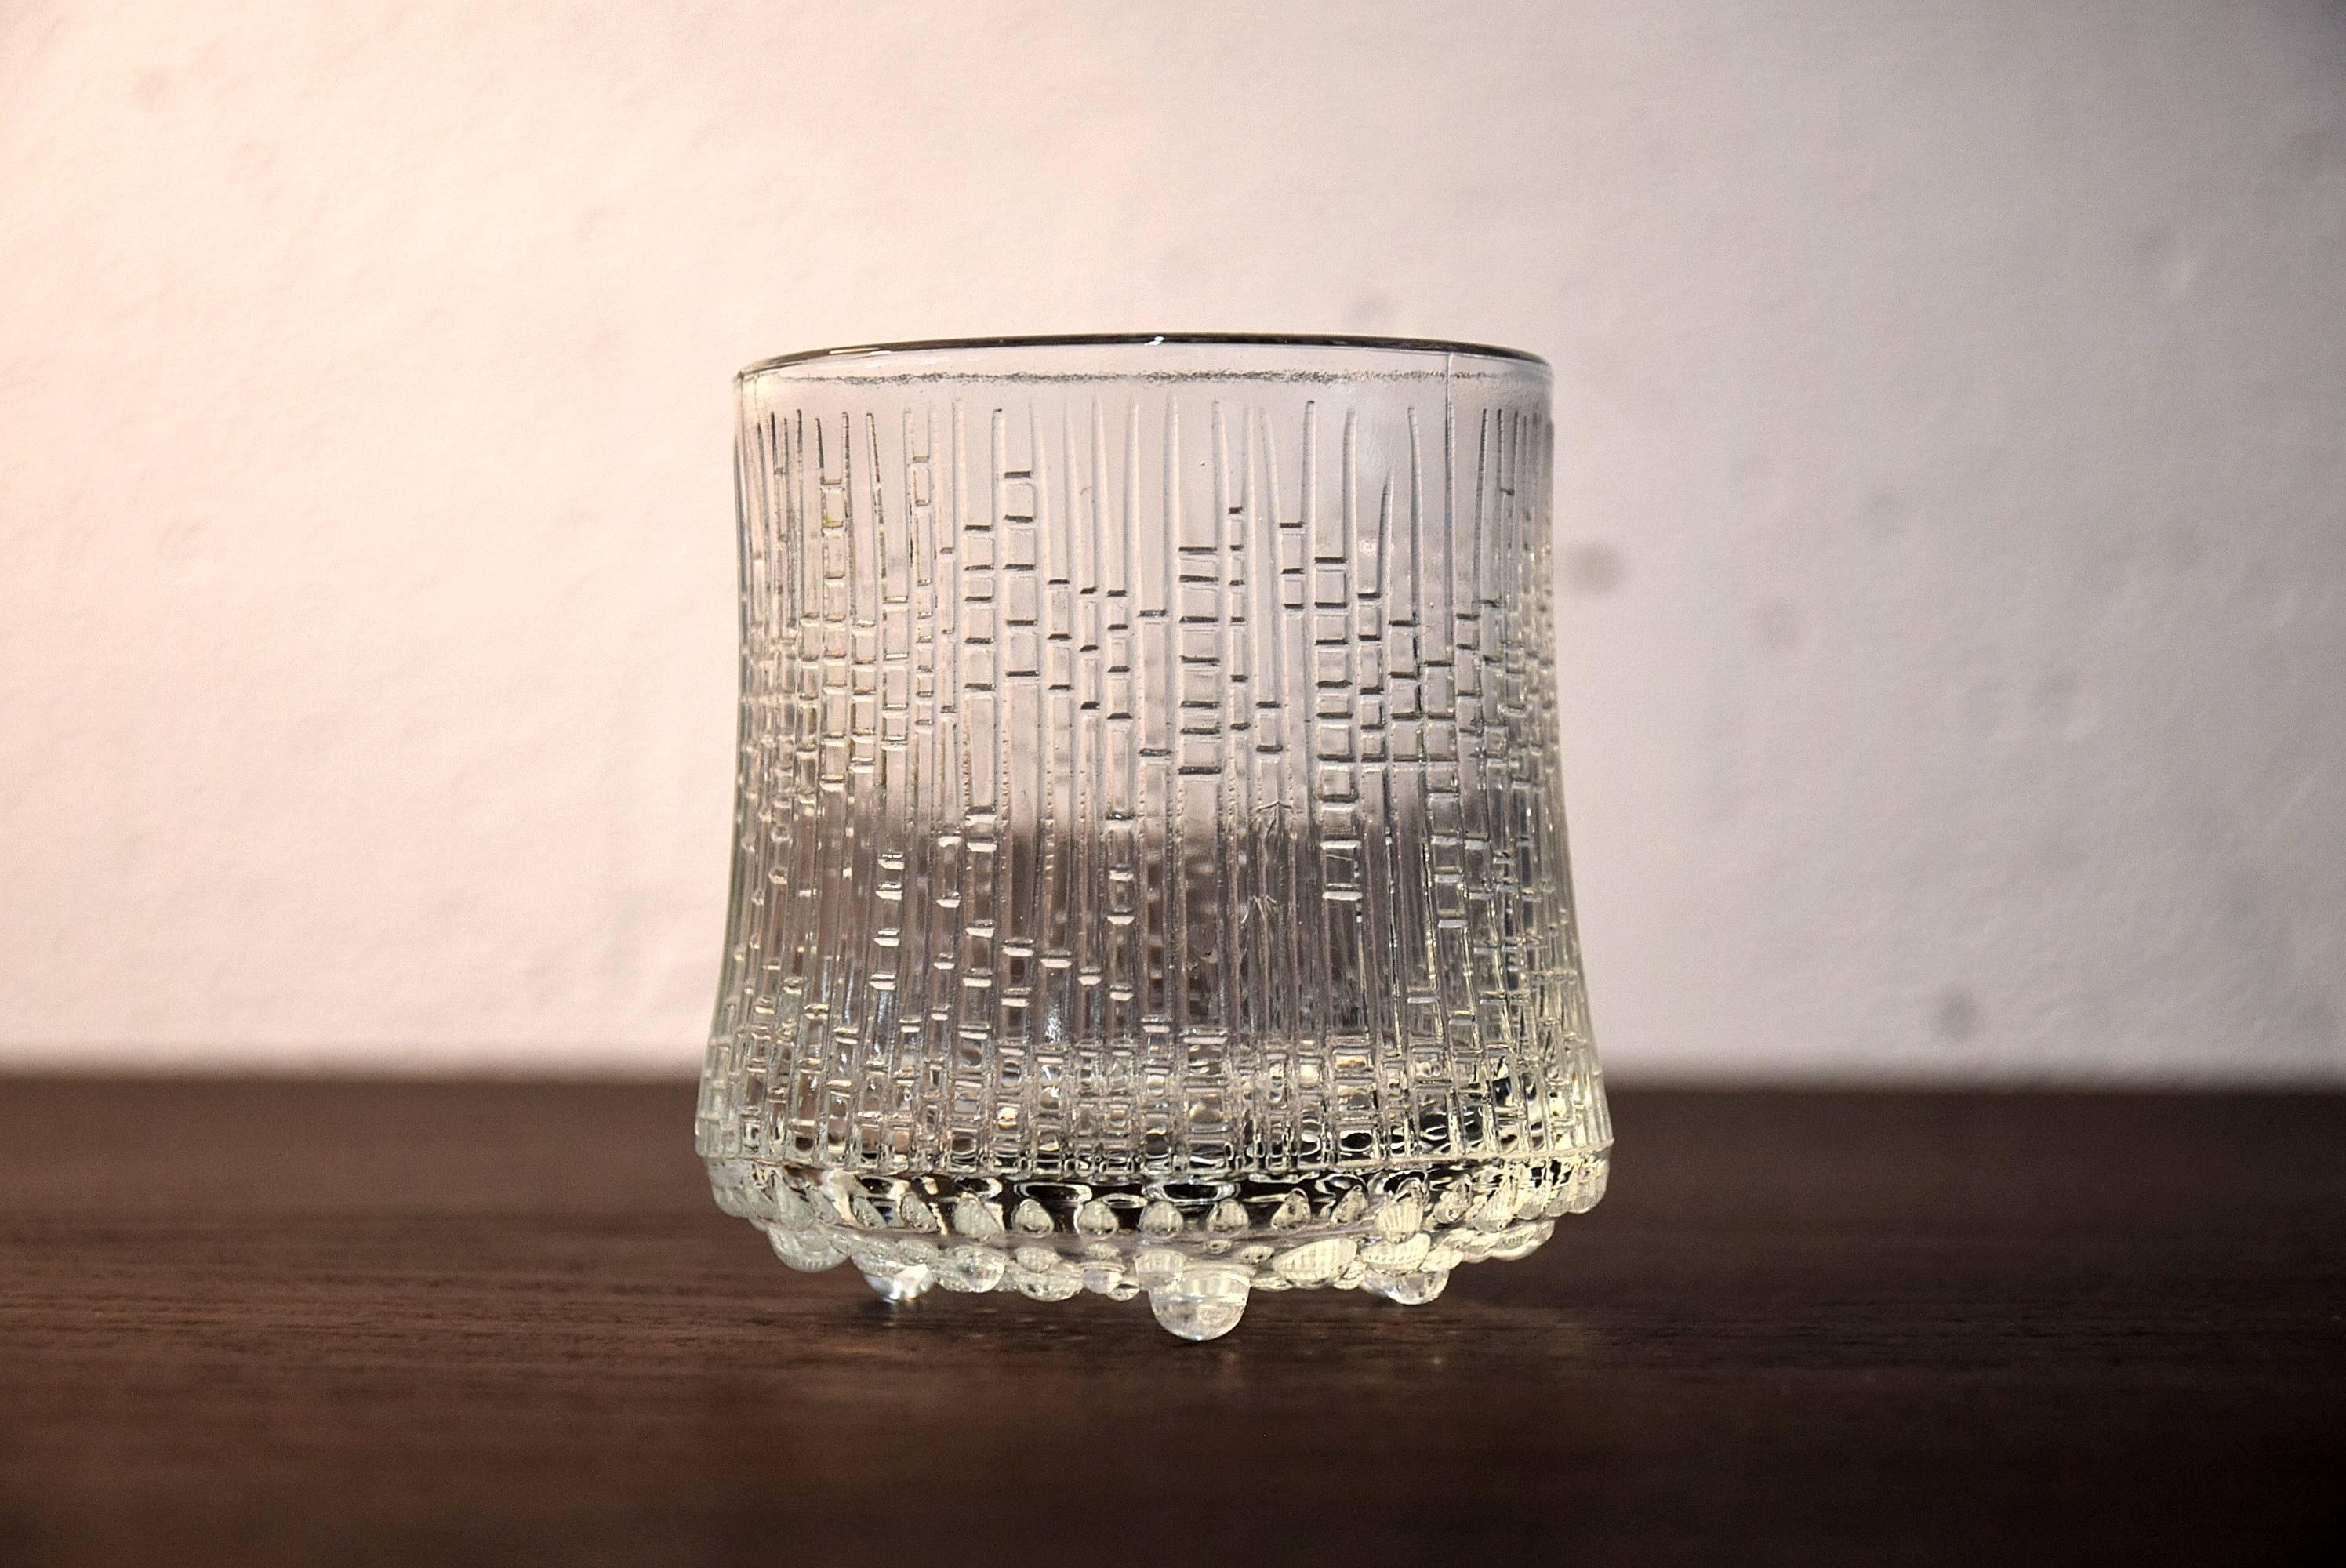 Ultima Thule 1960's Whiskey Glasses by Tapio Wirkkala in perfect condition.

Inspired by the melting ice in Lapland, Wirkkala originally created the surface of Ultima Thule in the 1960s after carving into a graphic mould. An Exclusive Design